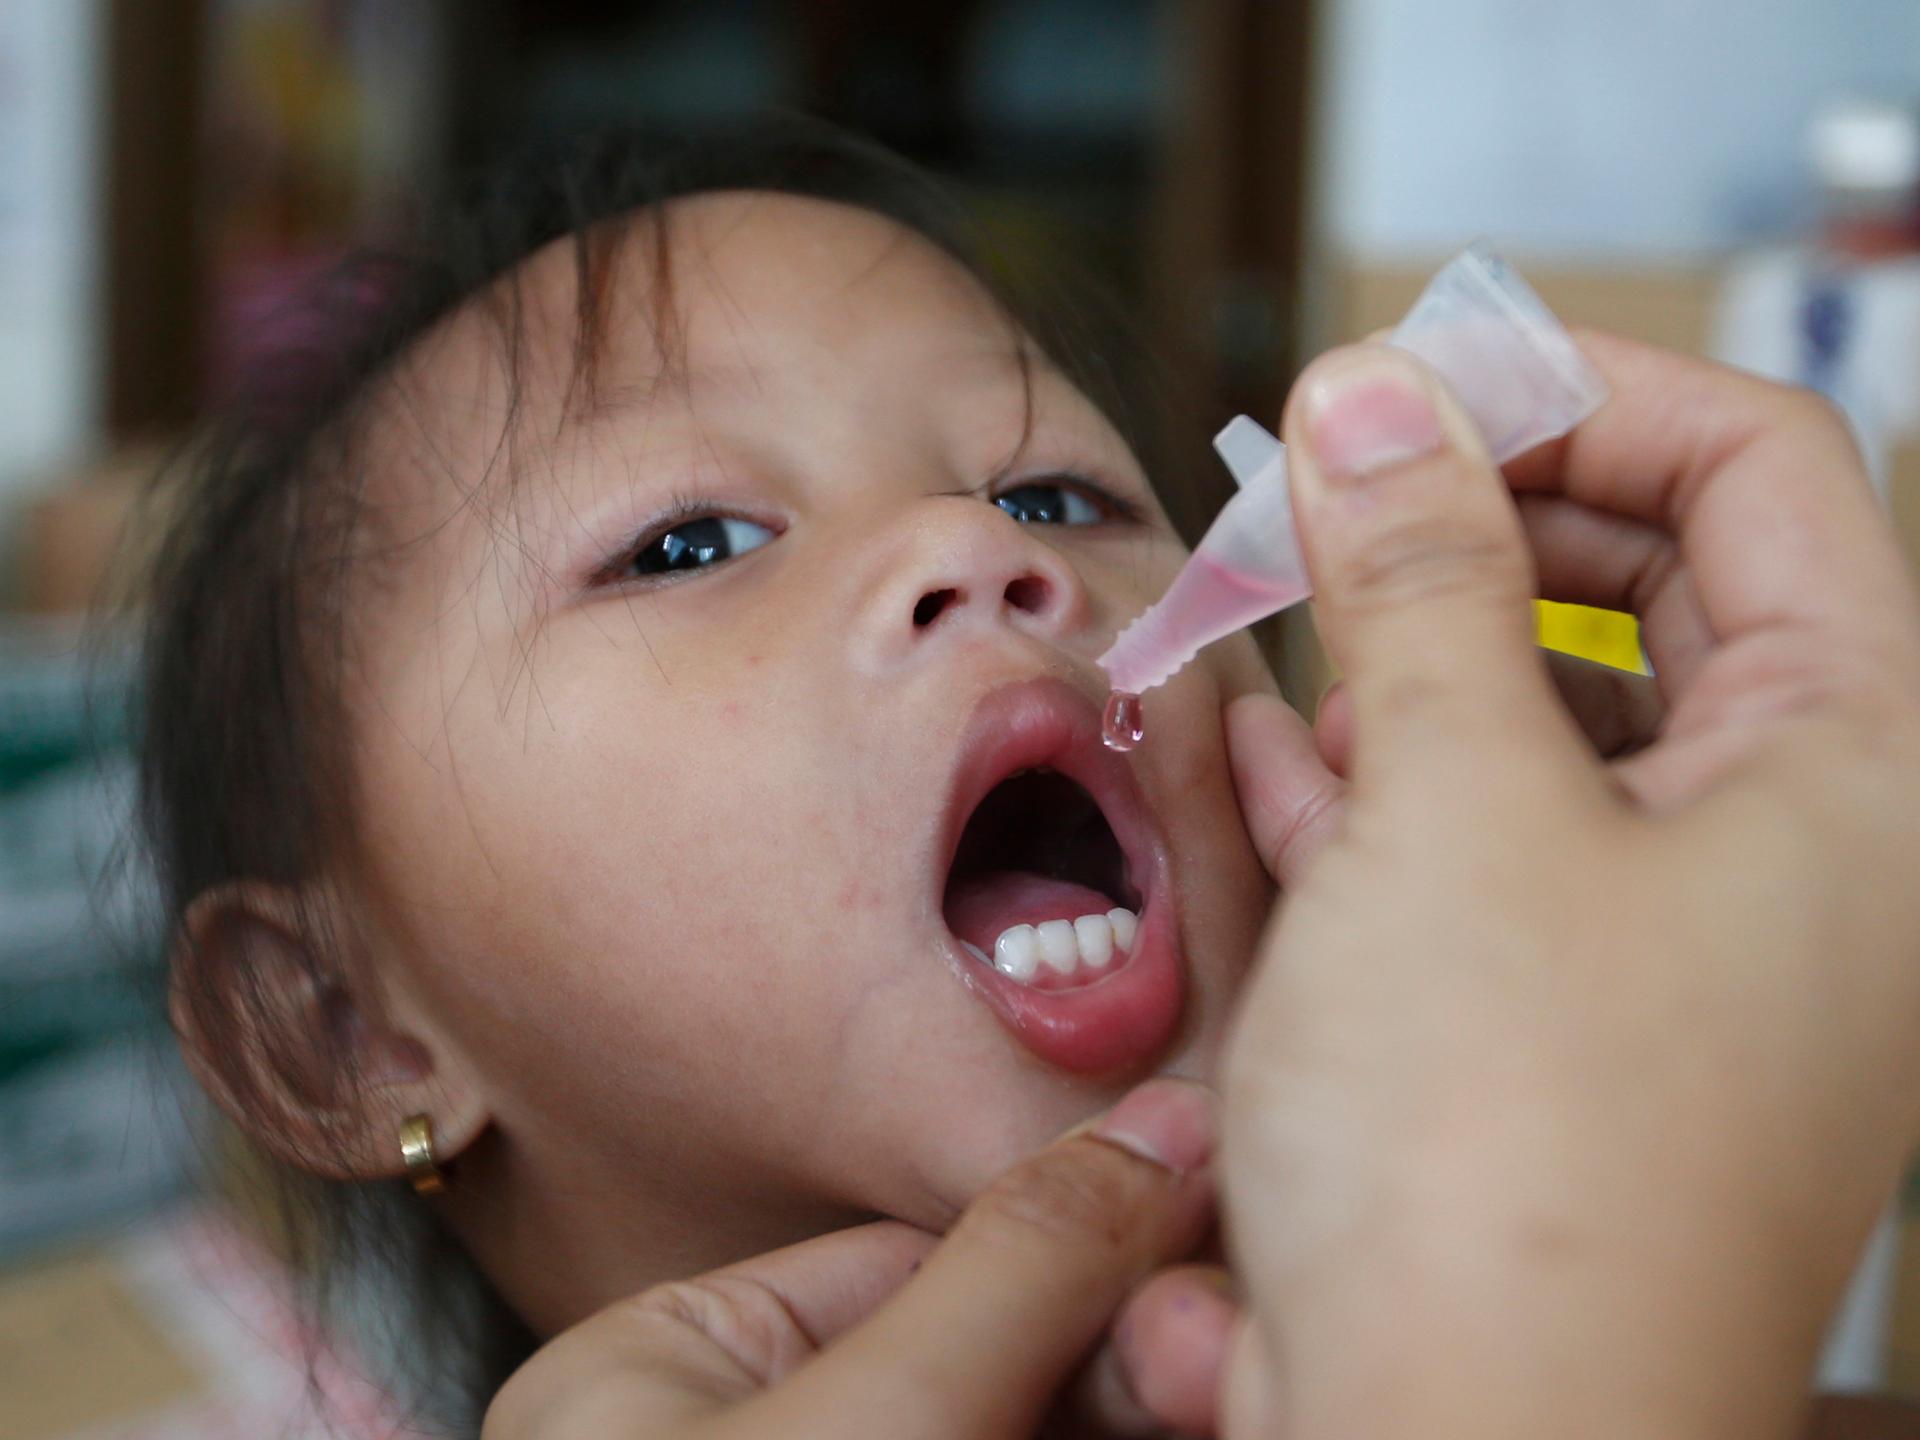 A girl receives anti-measles vaccination drops in Manila, the capital of the Philippines. Mass national vaccination campaigns against measles and polio are common in much of the developing world.